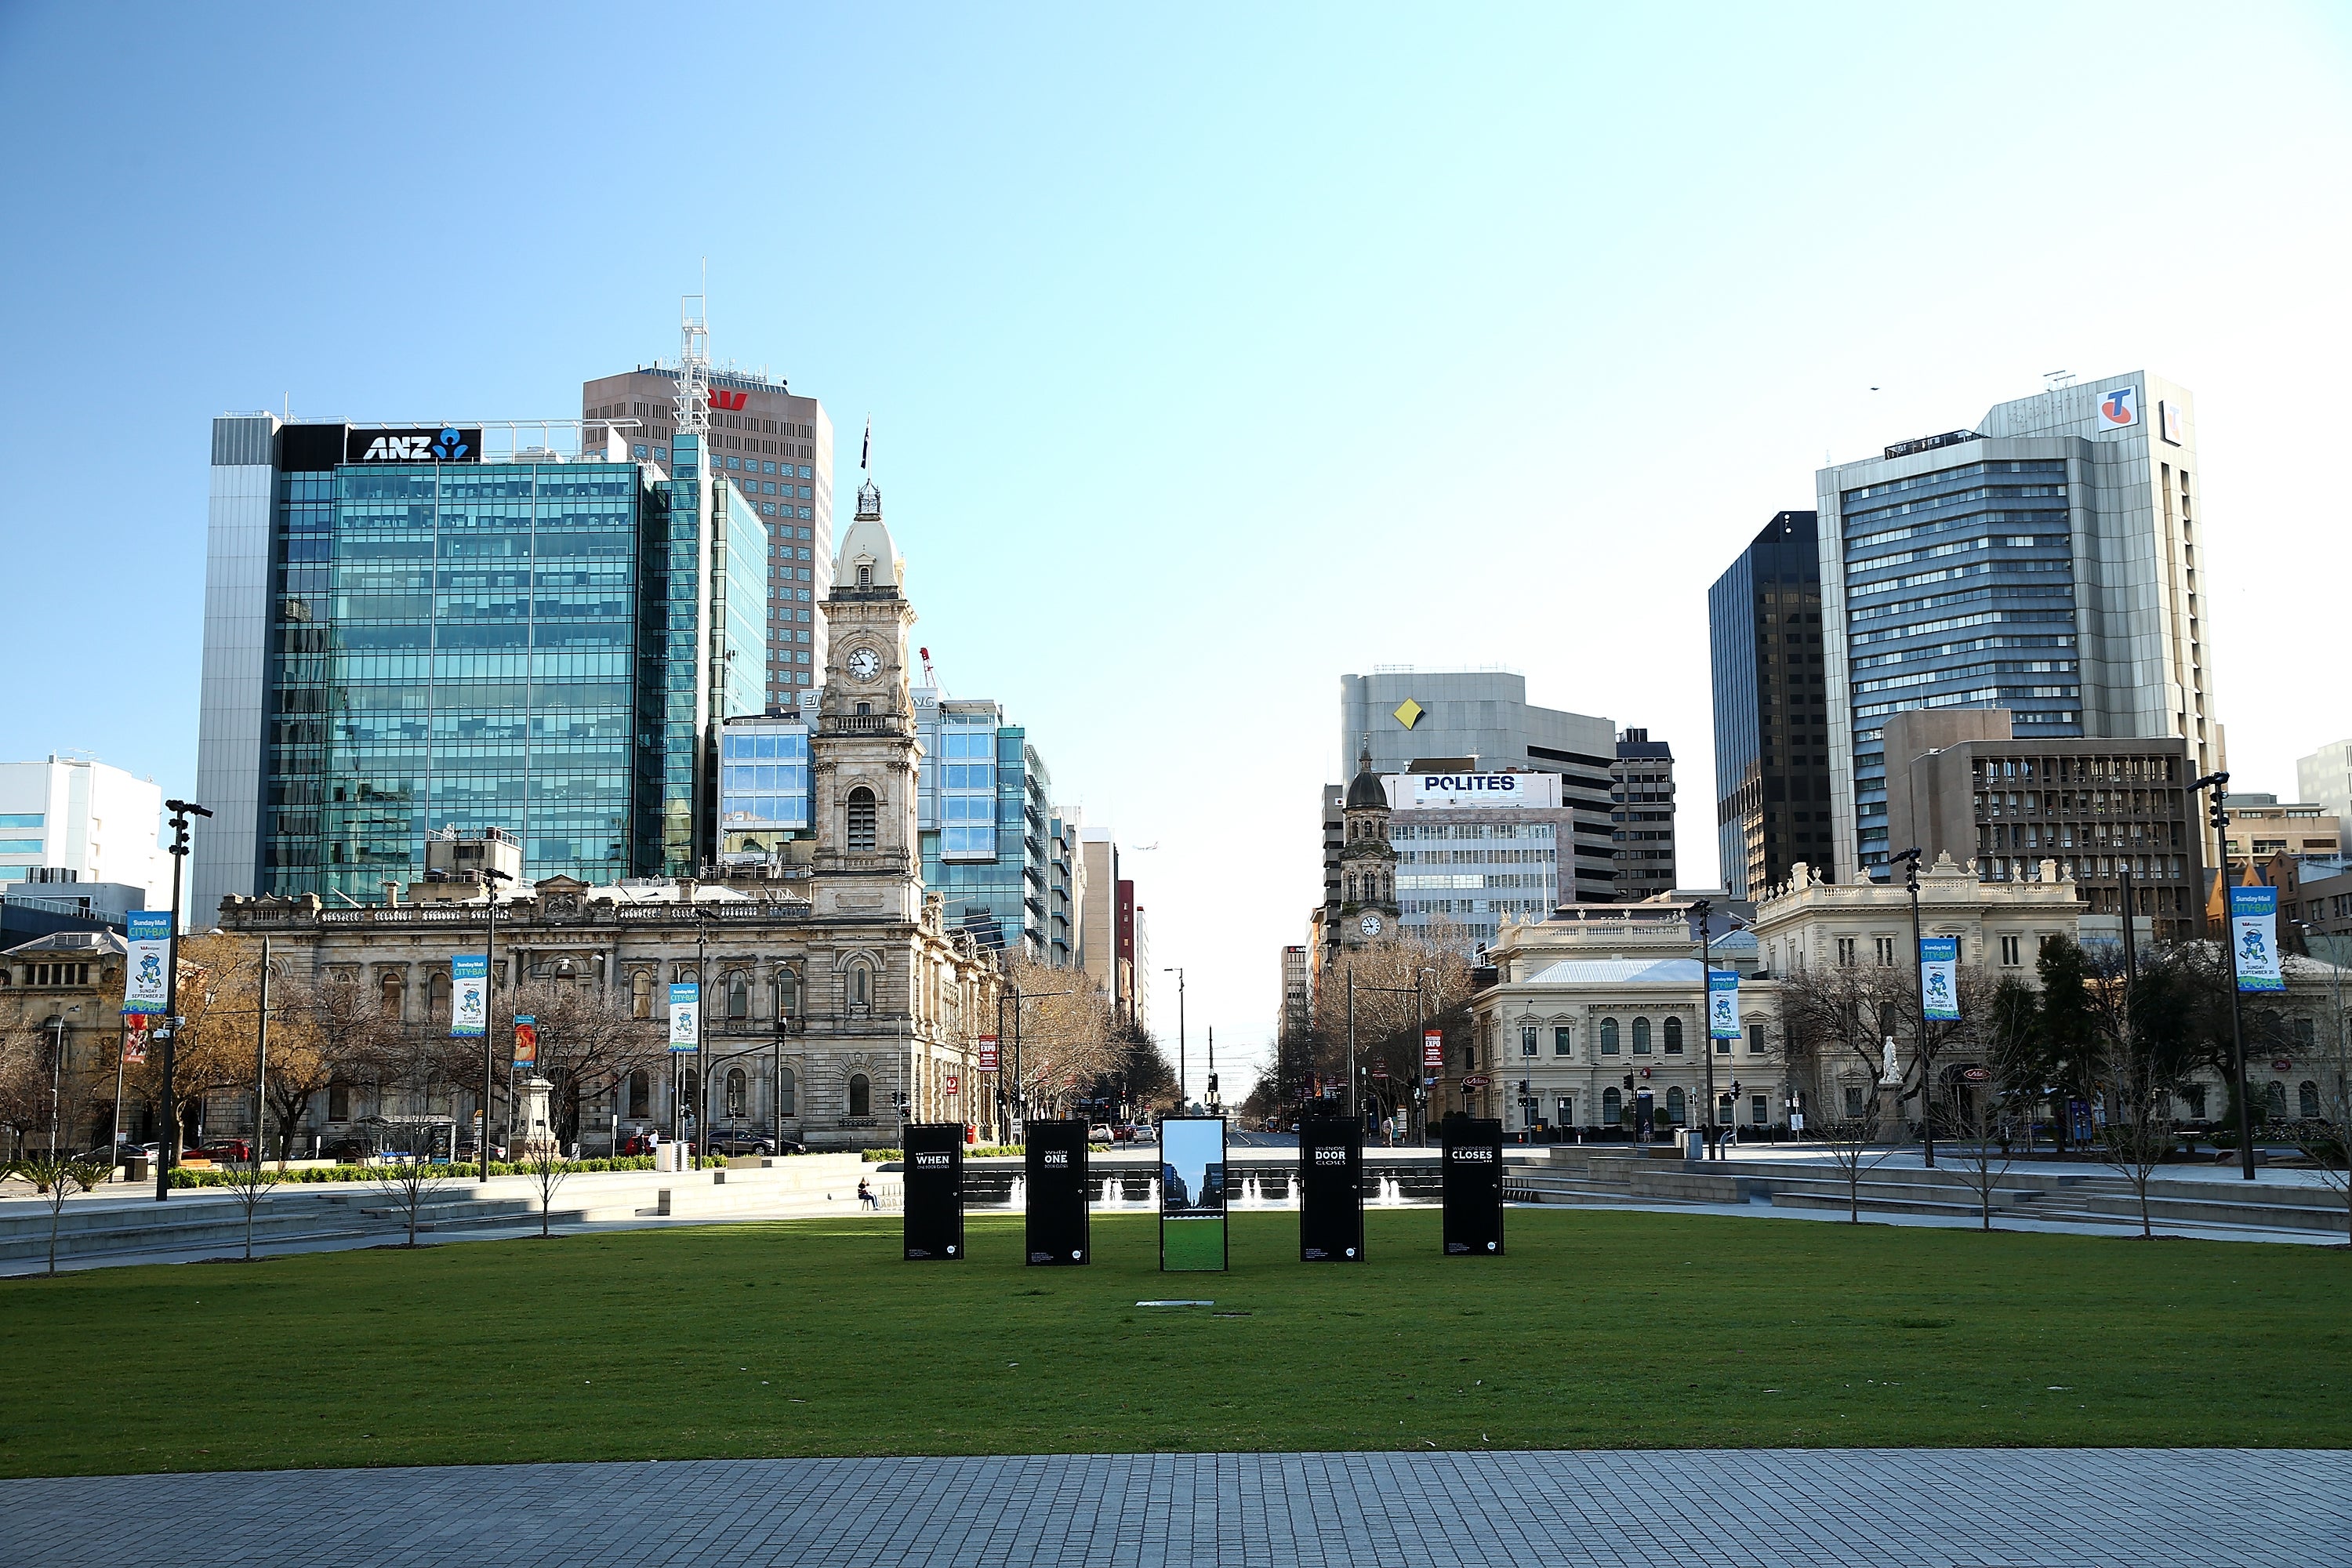 A view of central Adelaide, the city which is home to the University of South Australia.